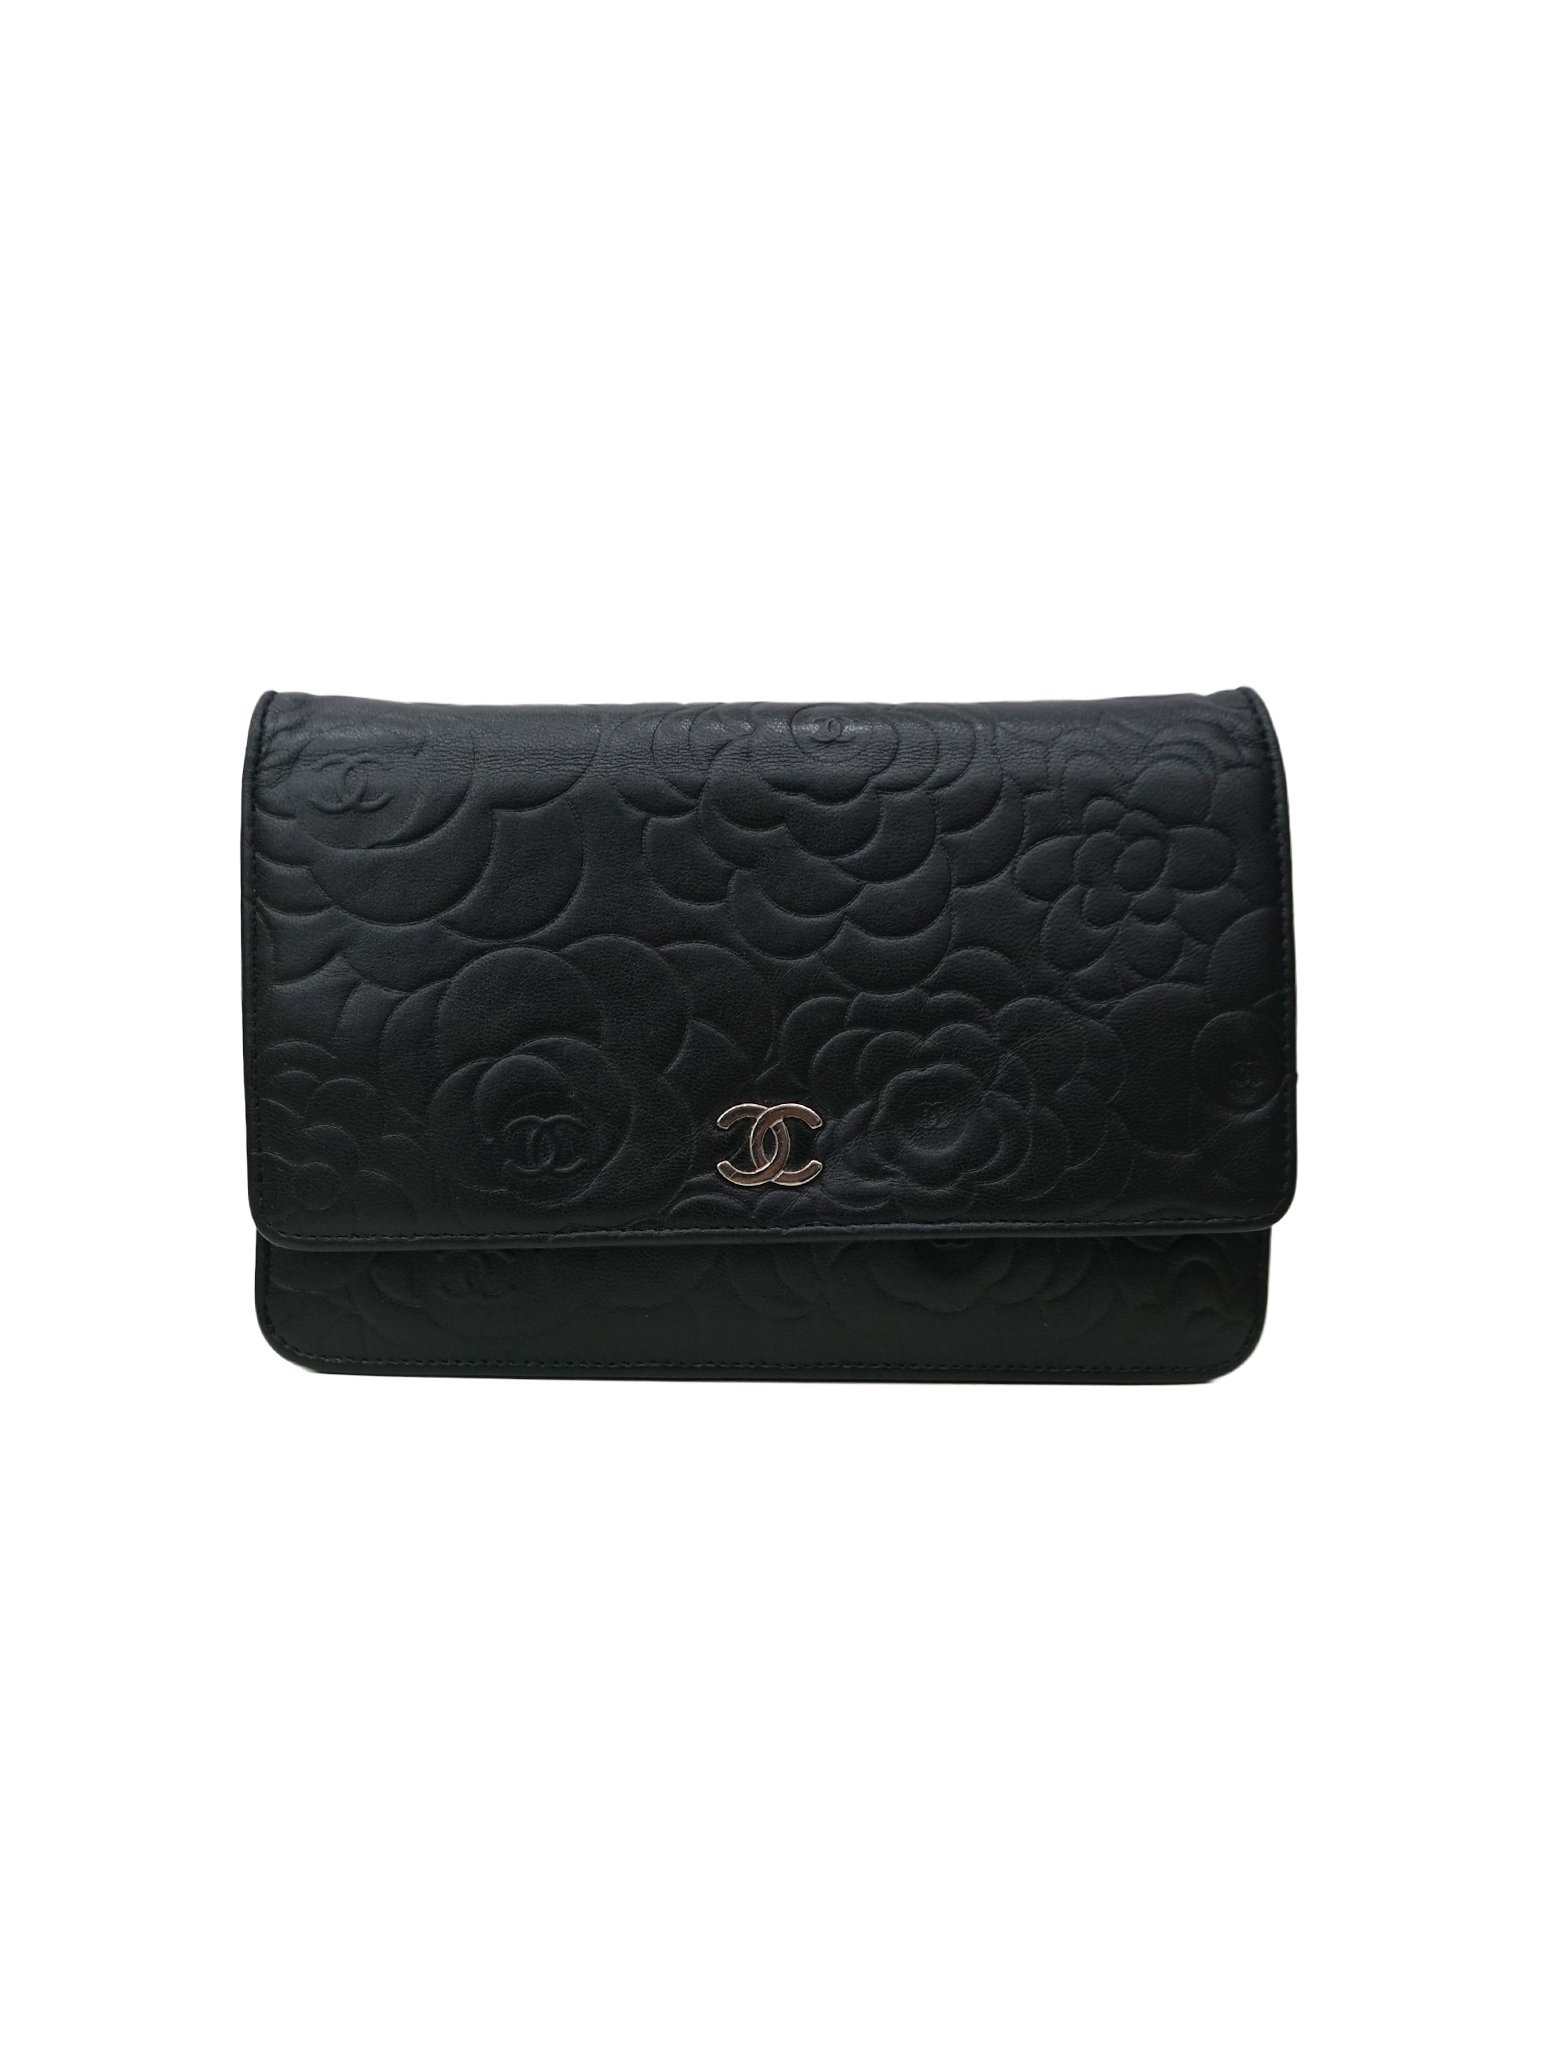 CAMELLIA EMBOSSED LEATHER WOC CLUTCH - styleforless